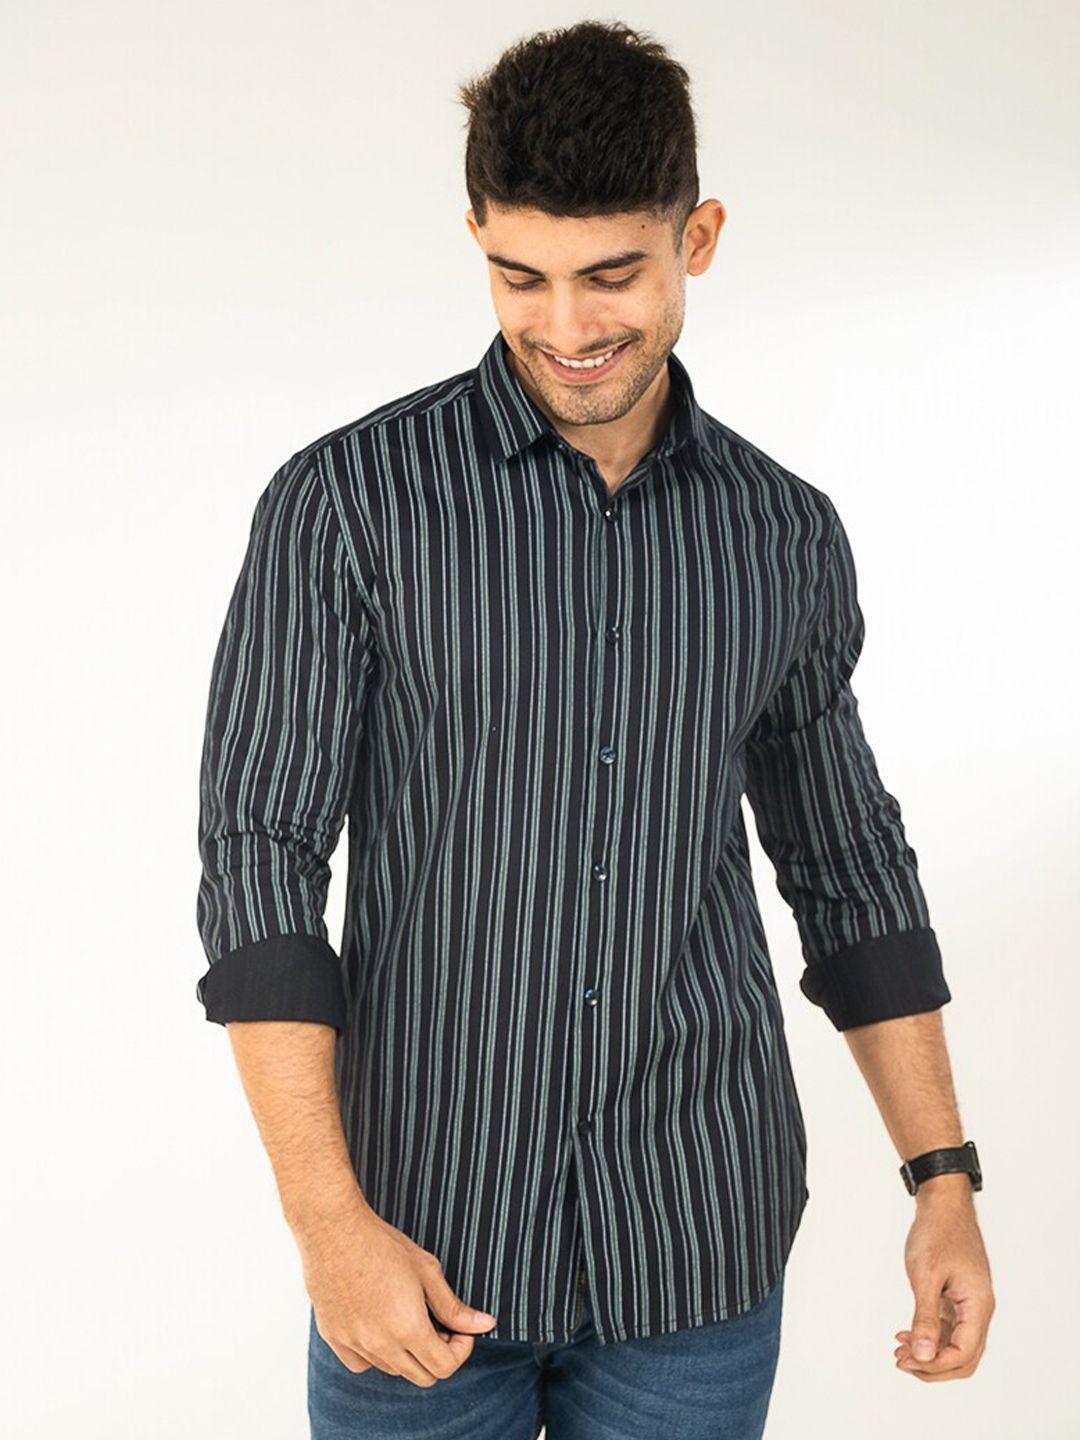 the bleu label spread collar long sleeves classic slim fit cotton striped casual shirt